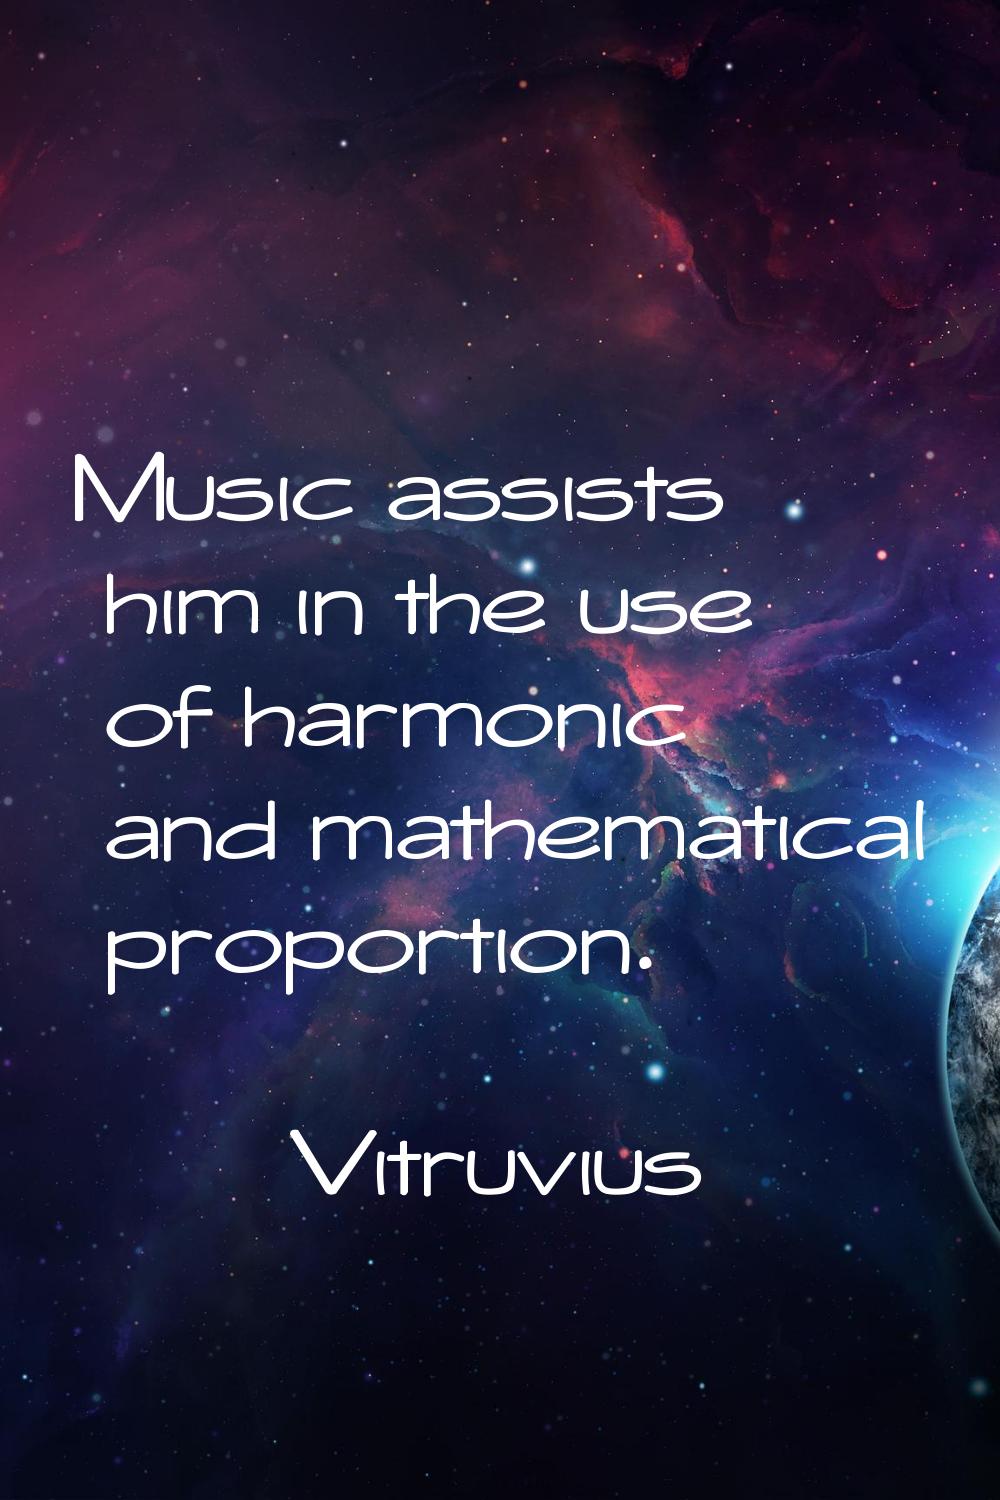 Music assists him in the use of harmonic and mathematical proportion.